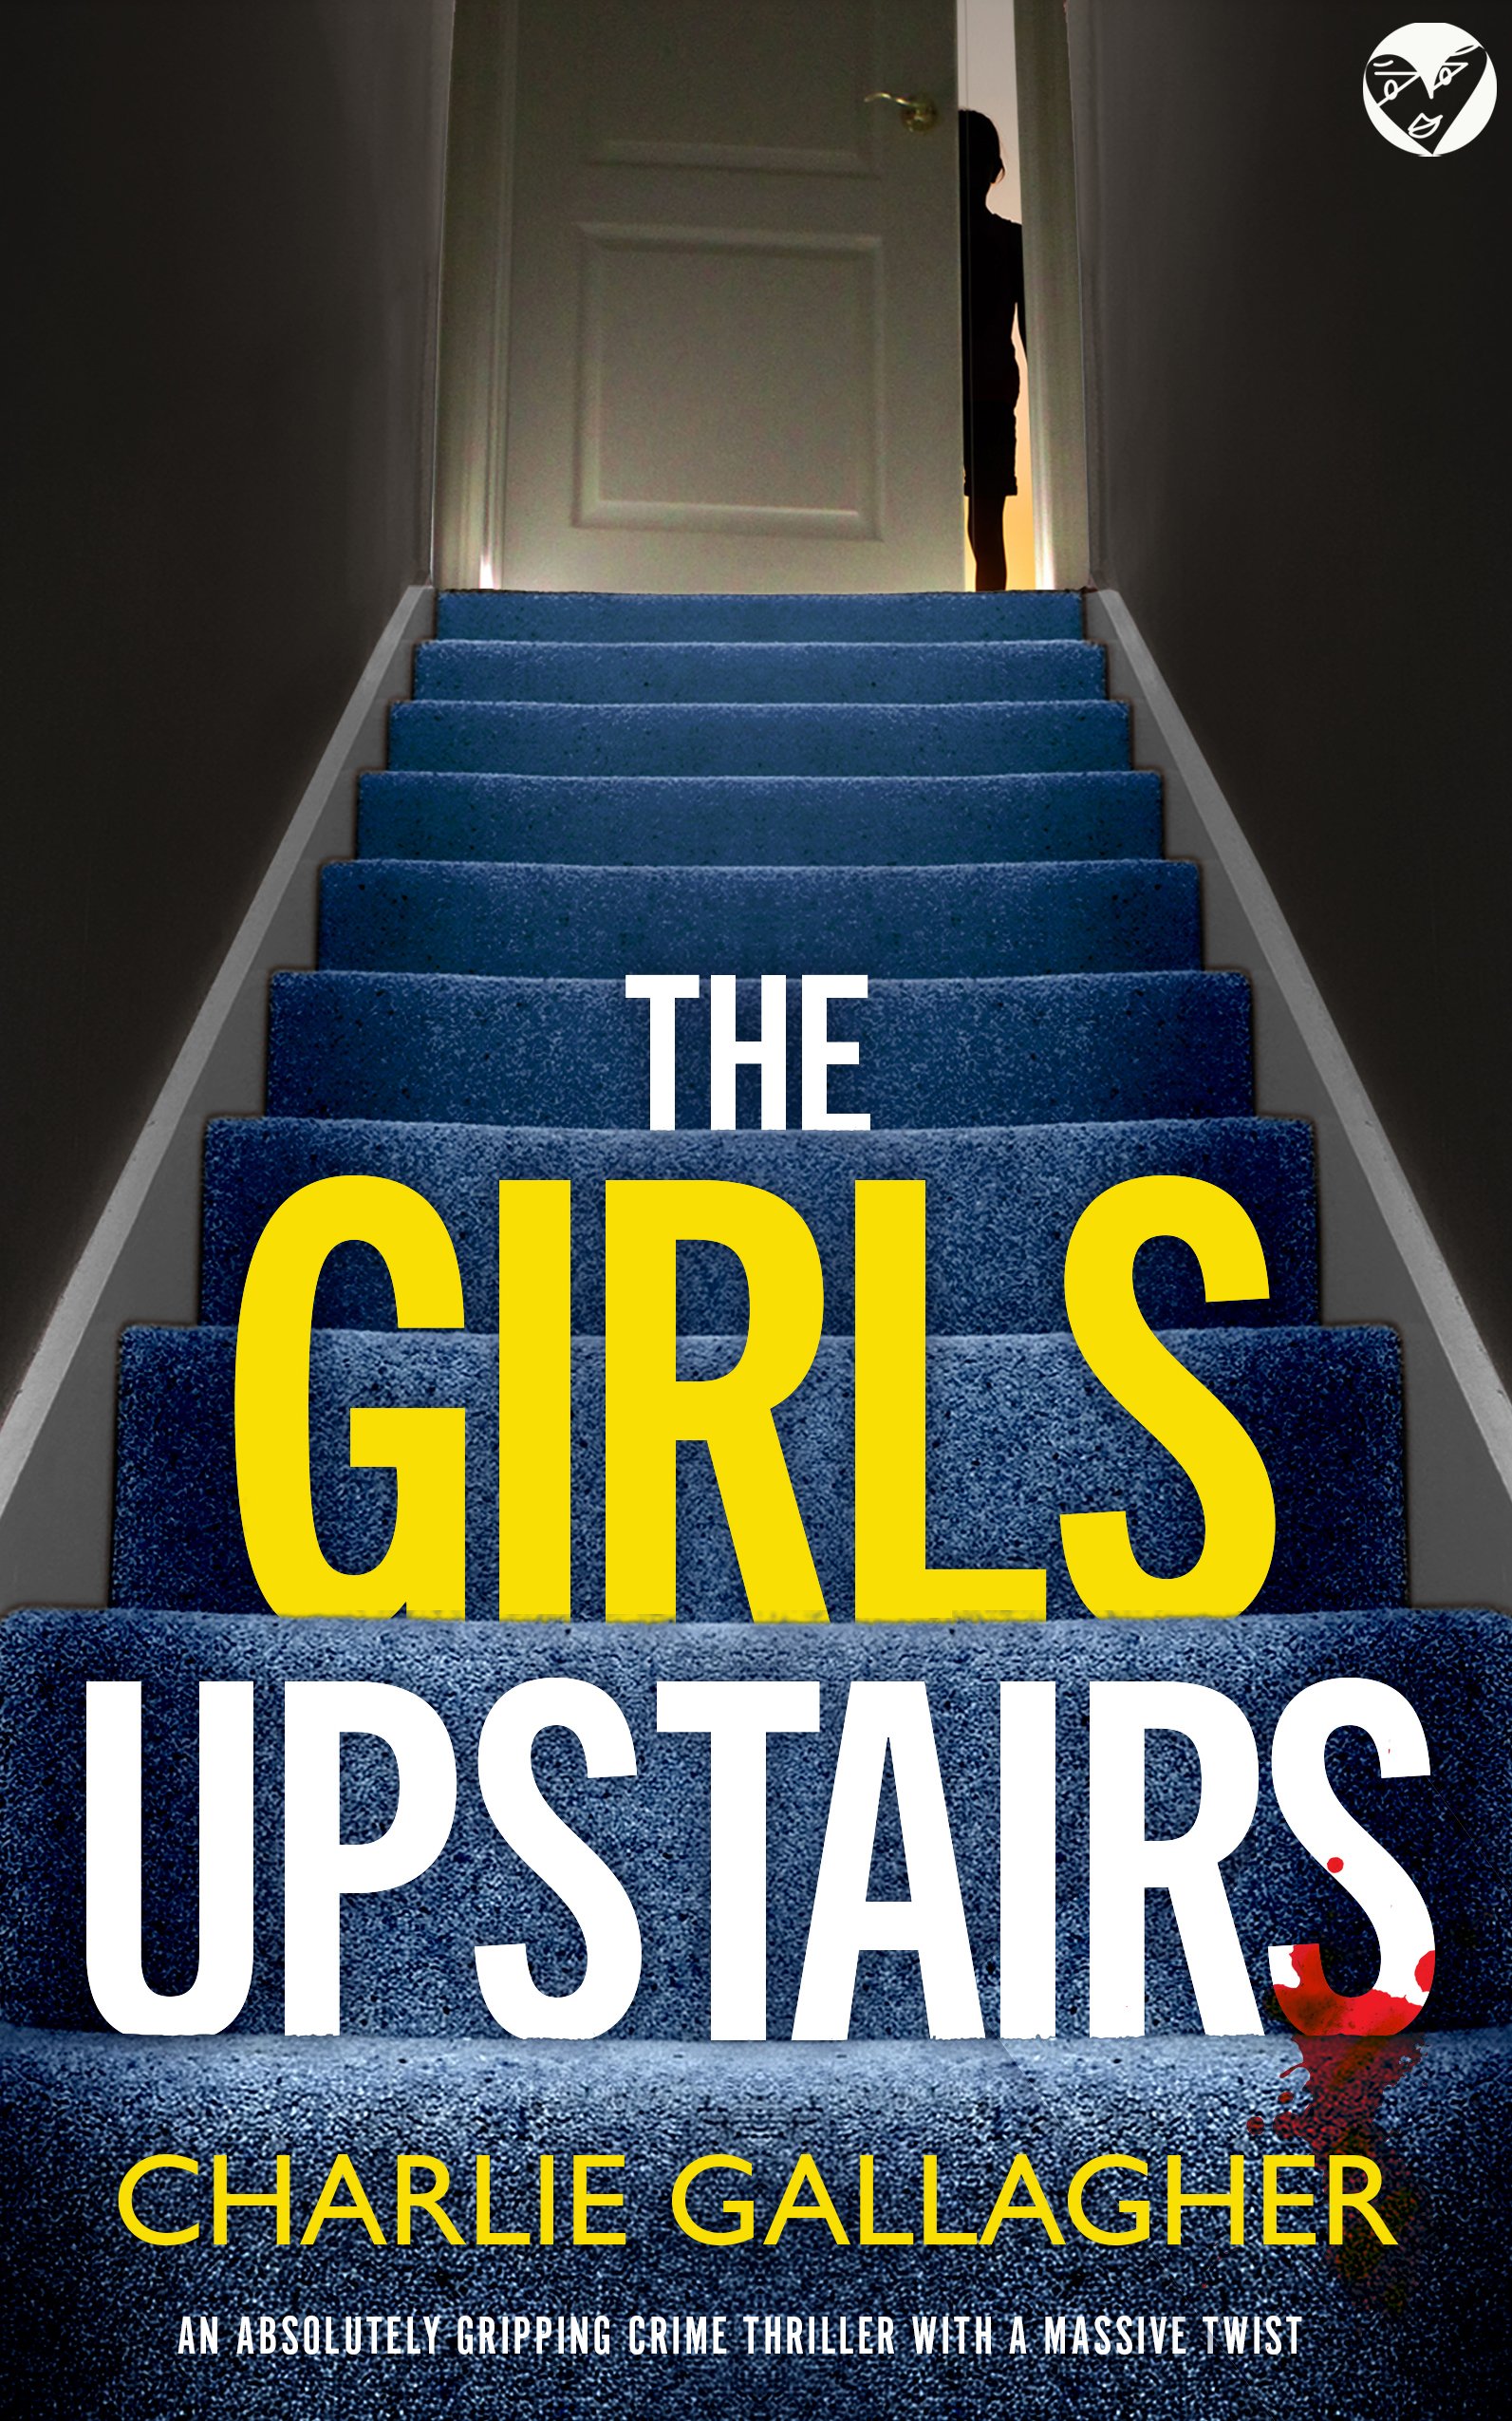 THE GIRLS UPSTAIRS cover publish.jpg